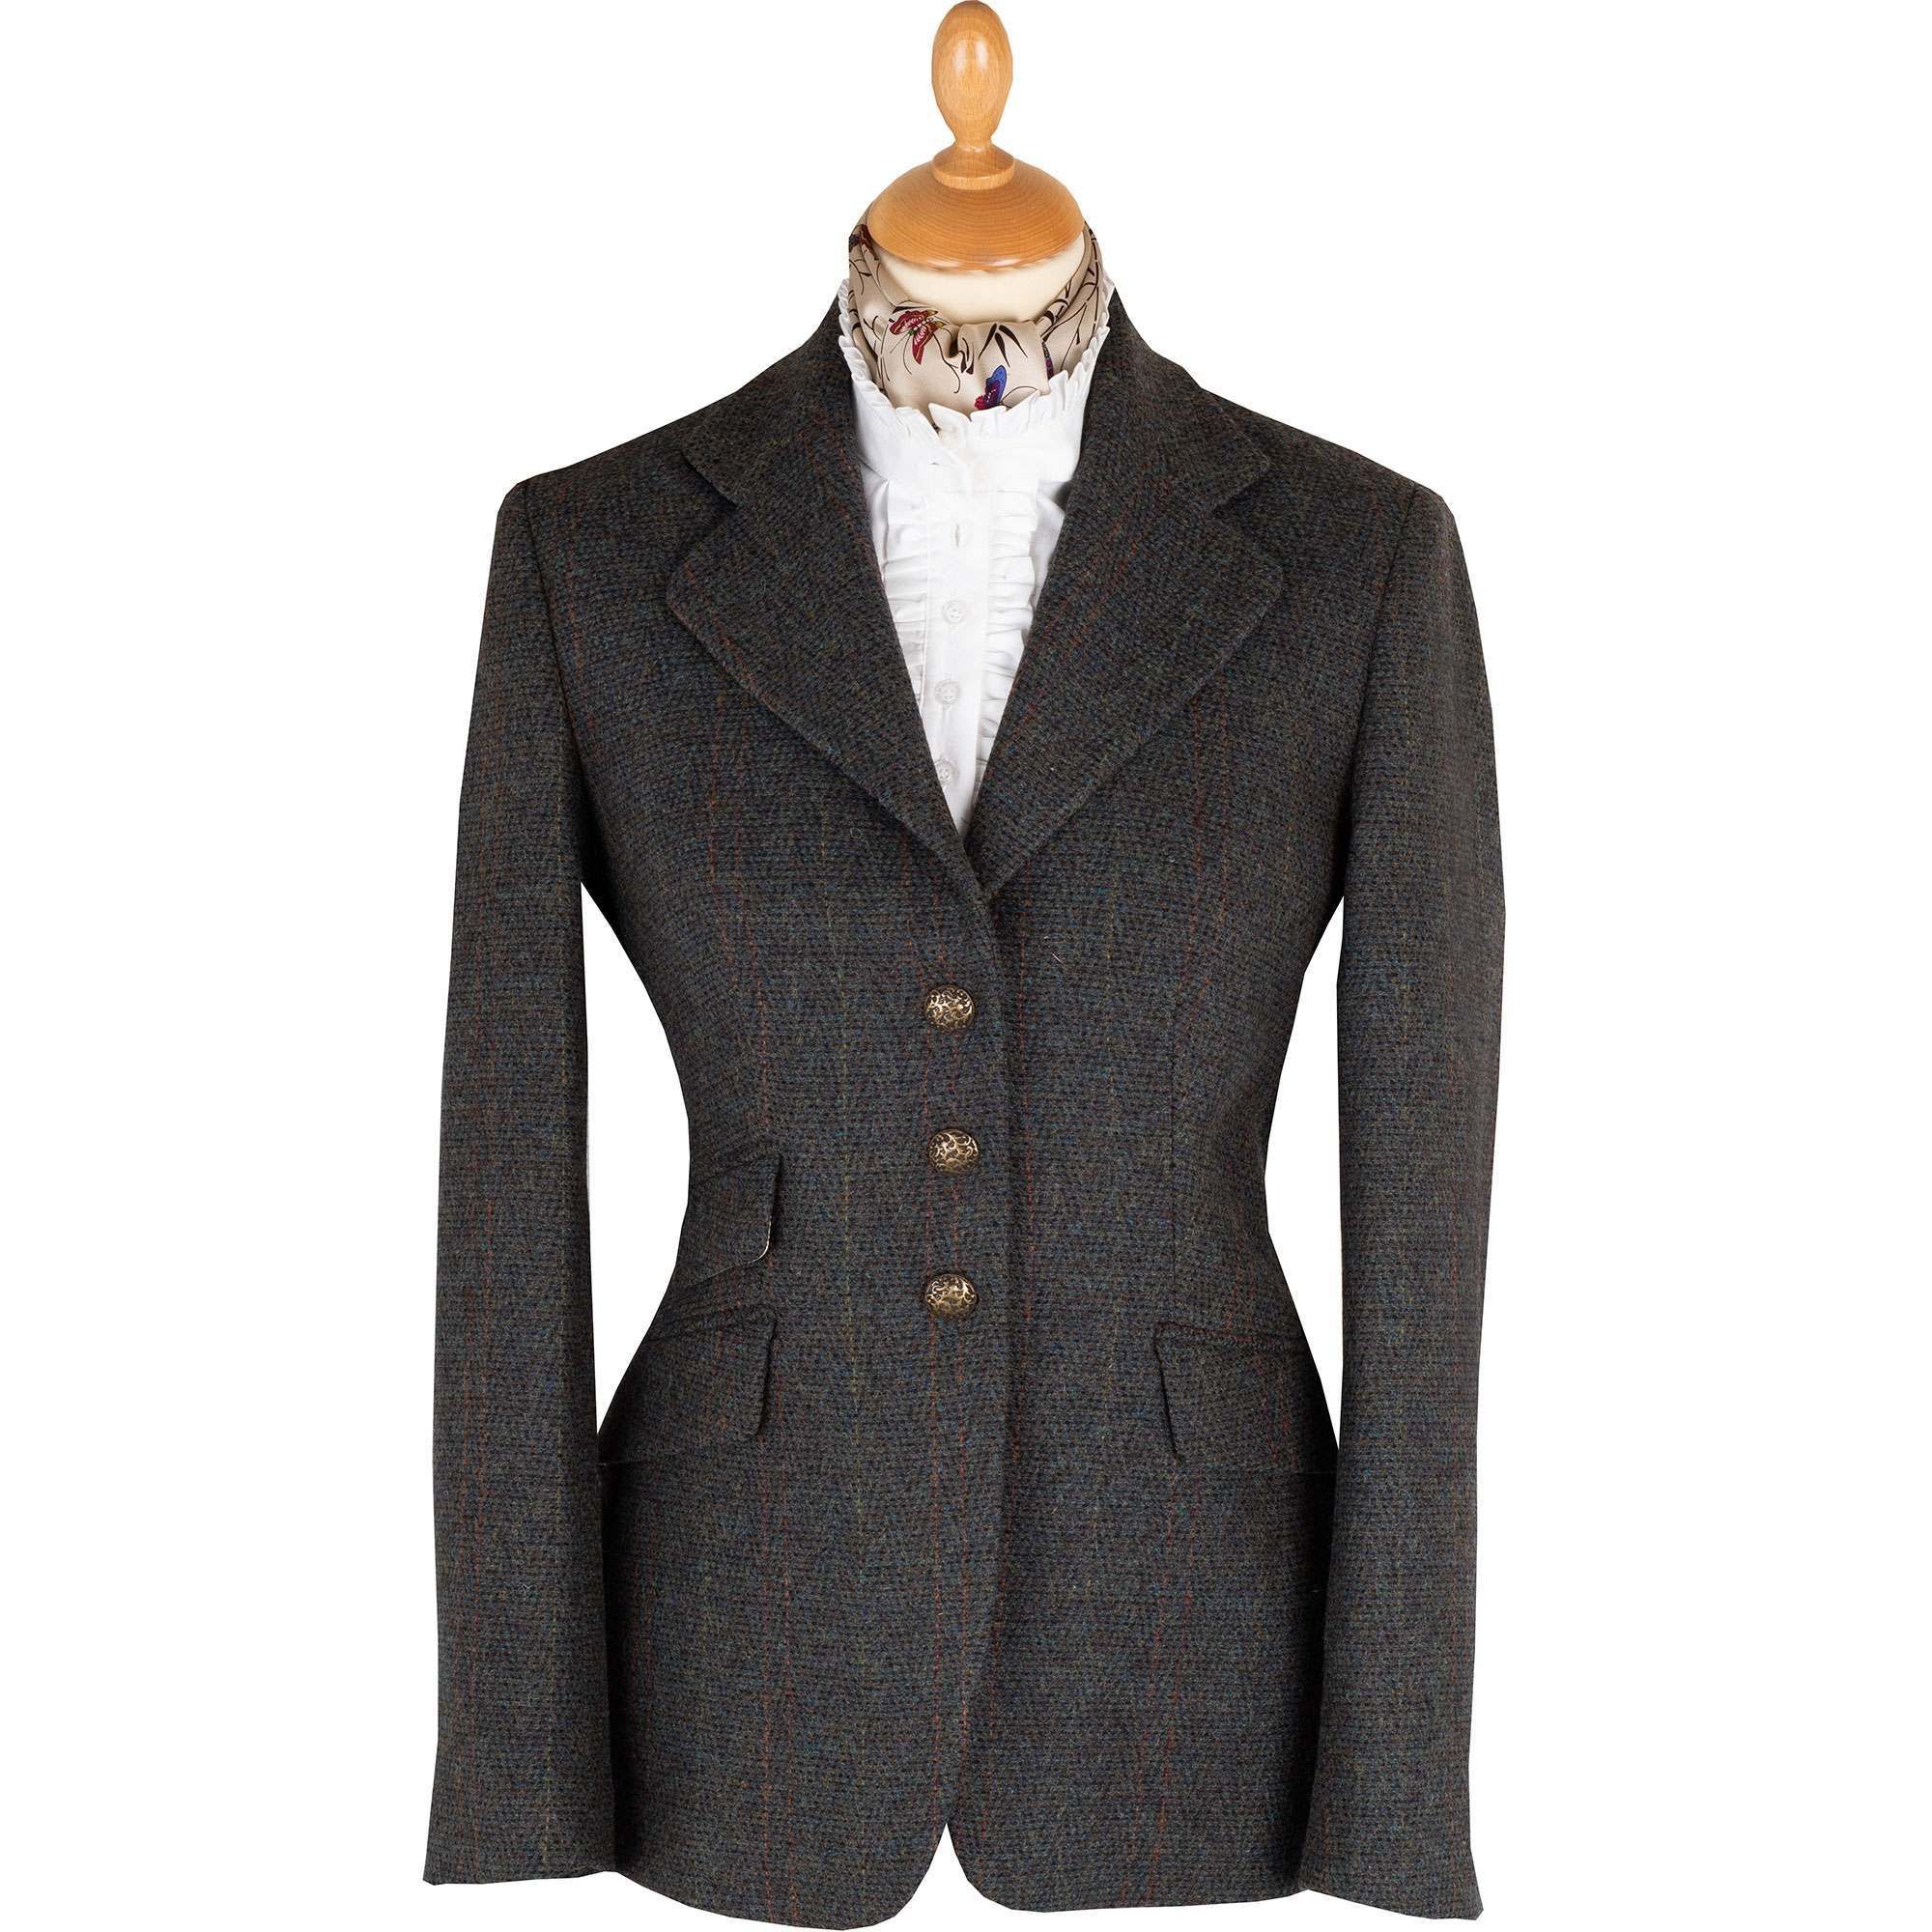 Blue T.ba Tweed Double Vent Jacket | Ladies Country Clothing | Cordings